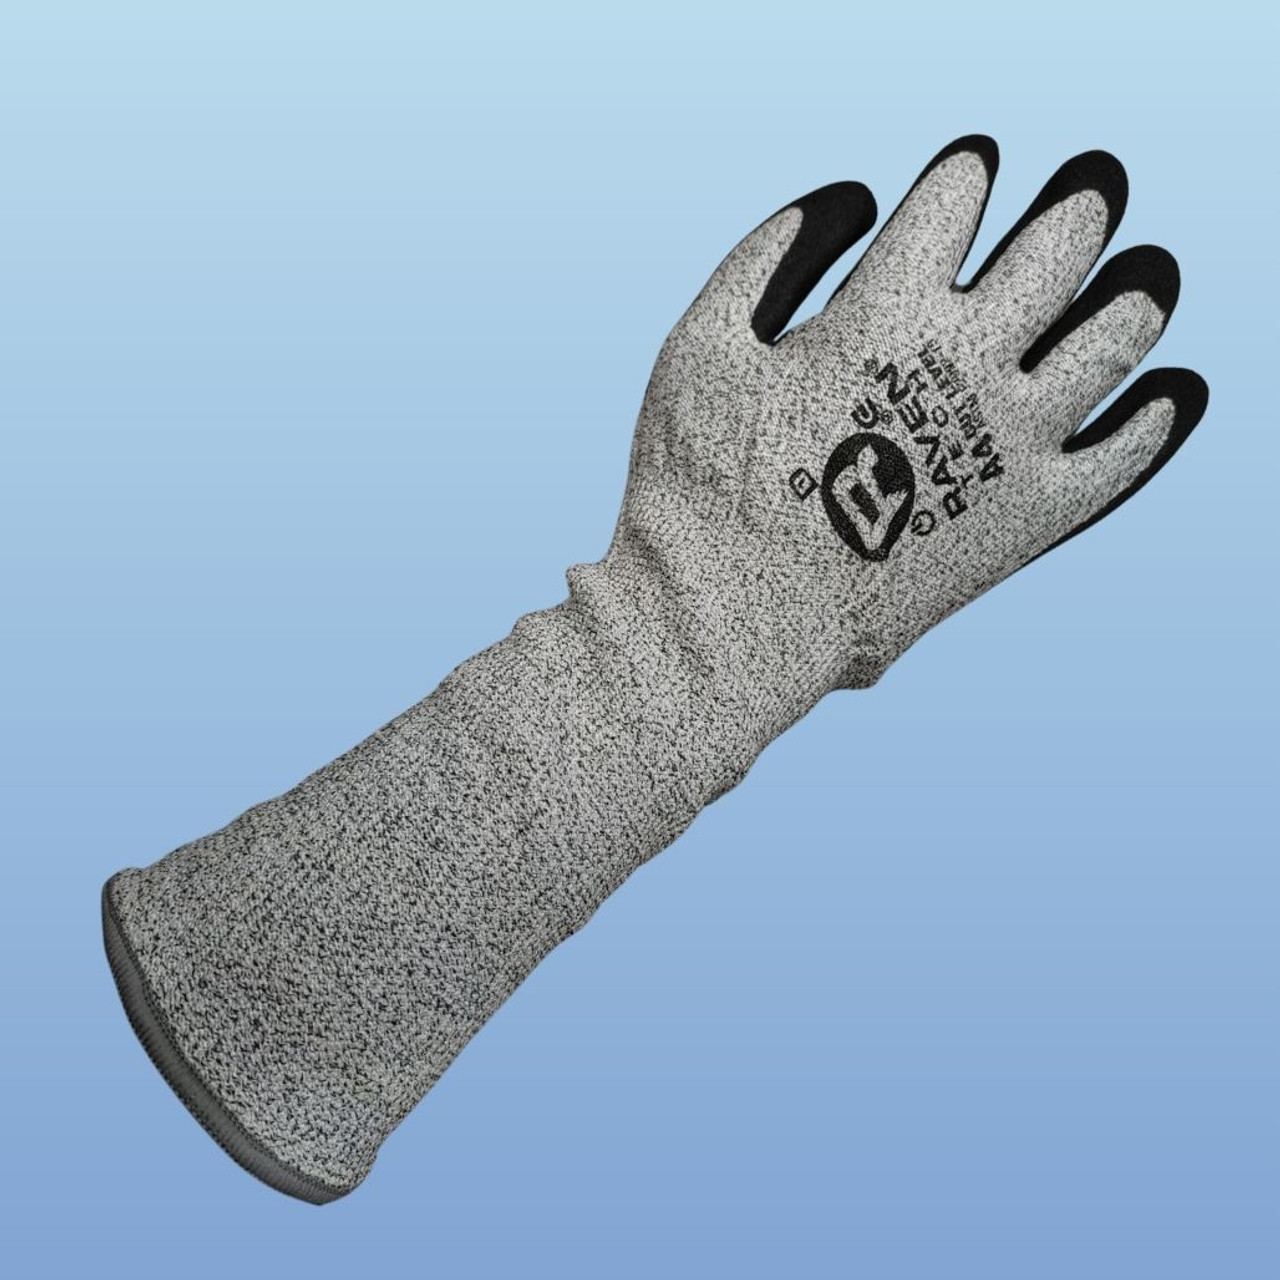 SAS Raven Tech Extended Cuff Sandy Nitrile Palm Coated Glove